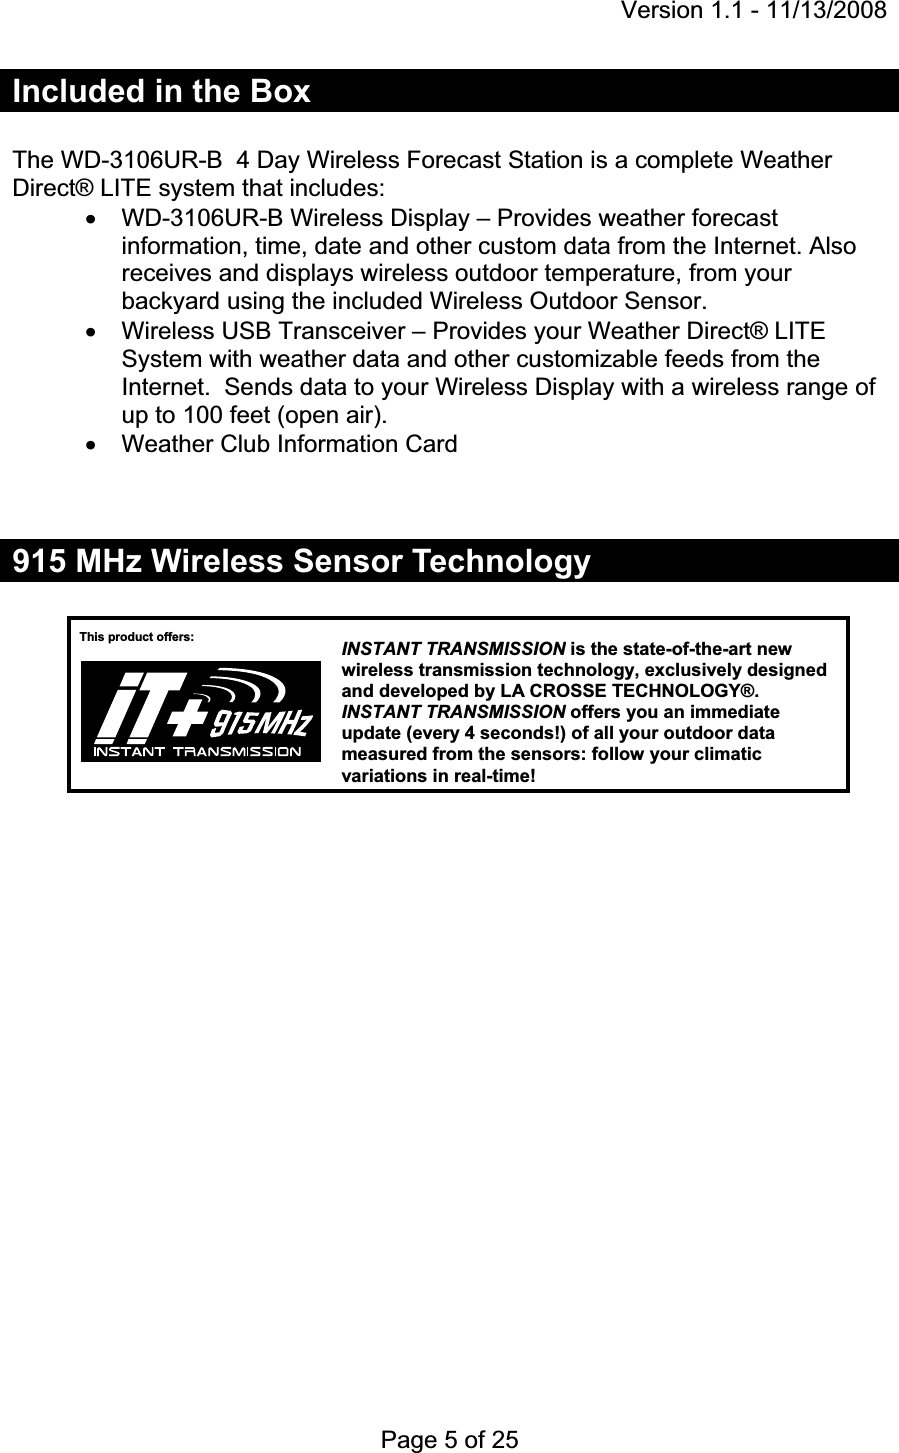 Version 1.1 - 11/13/2008 Page 5 of 25 Included in the Box The WD-3106UR-B  4 Day Wireless Forecast Station is a complete Weather Direct® LITE system that includes: x  WD-3106UR-B Wireless Display – Provides weather forecast information, time, date and other custom data from the Internet. Also receives and displays wireless outdoor temperature, from your backyard using the included Wireless Outdoor Sensor. x  Wireless USB Transceiver – Provides your Weather Direct® LITE System with weather data and other customizable feeds from the Internet.  Sends data to your Wireless Display with a wireless range of up to 100 feet (open air). x  Weather Club Information Card 915 MHz Wireless Sensor Technology This product offers:  INSTANT TRANSMISSIONis the state-of-the-art new wireless transmission technology, exclusively designed and developed by LA CROSSE TECHNOLOGY®. INSTANT TRANSMISSION offers you an immediate update (every 4 seconds!) of all your outdoor data measured from the sensors: follow your climatic variations in real-time!